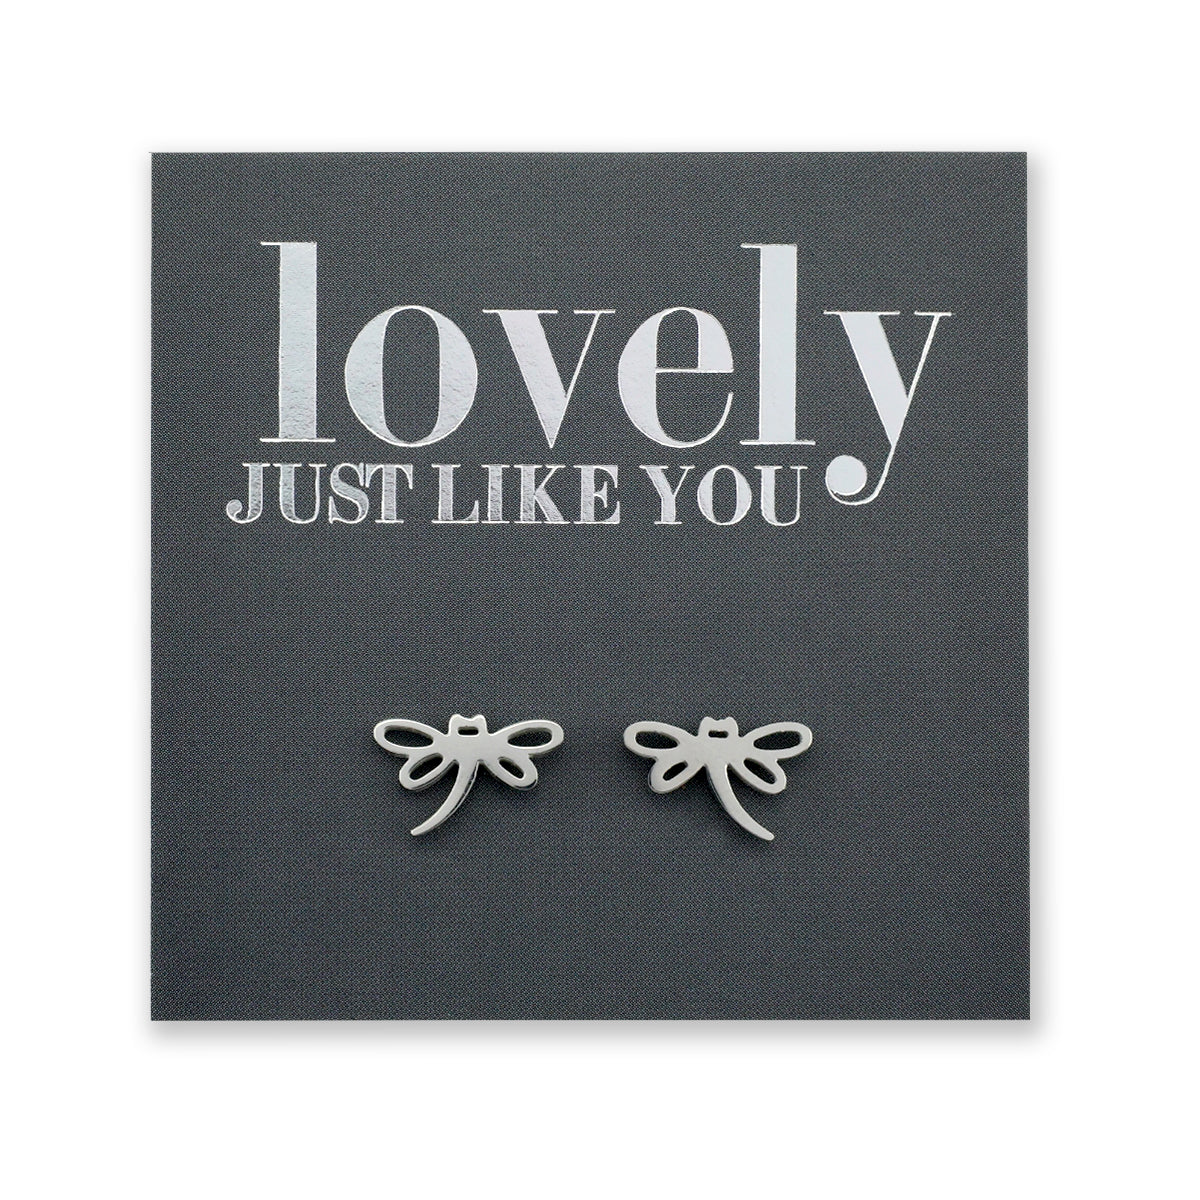 Stainless Steel Earring Studs - Lovely Just Like You - DRAGONFLY LOVE